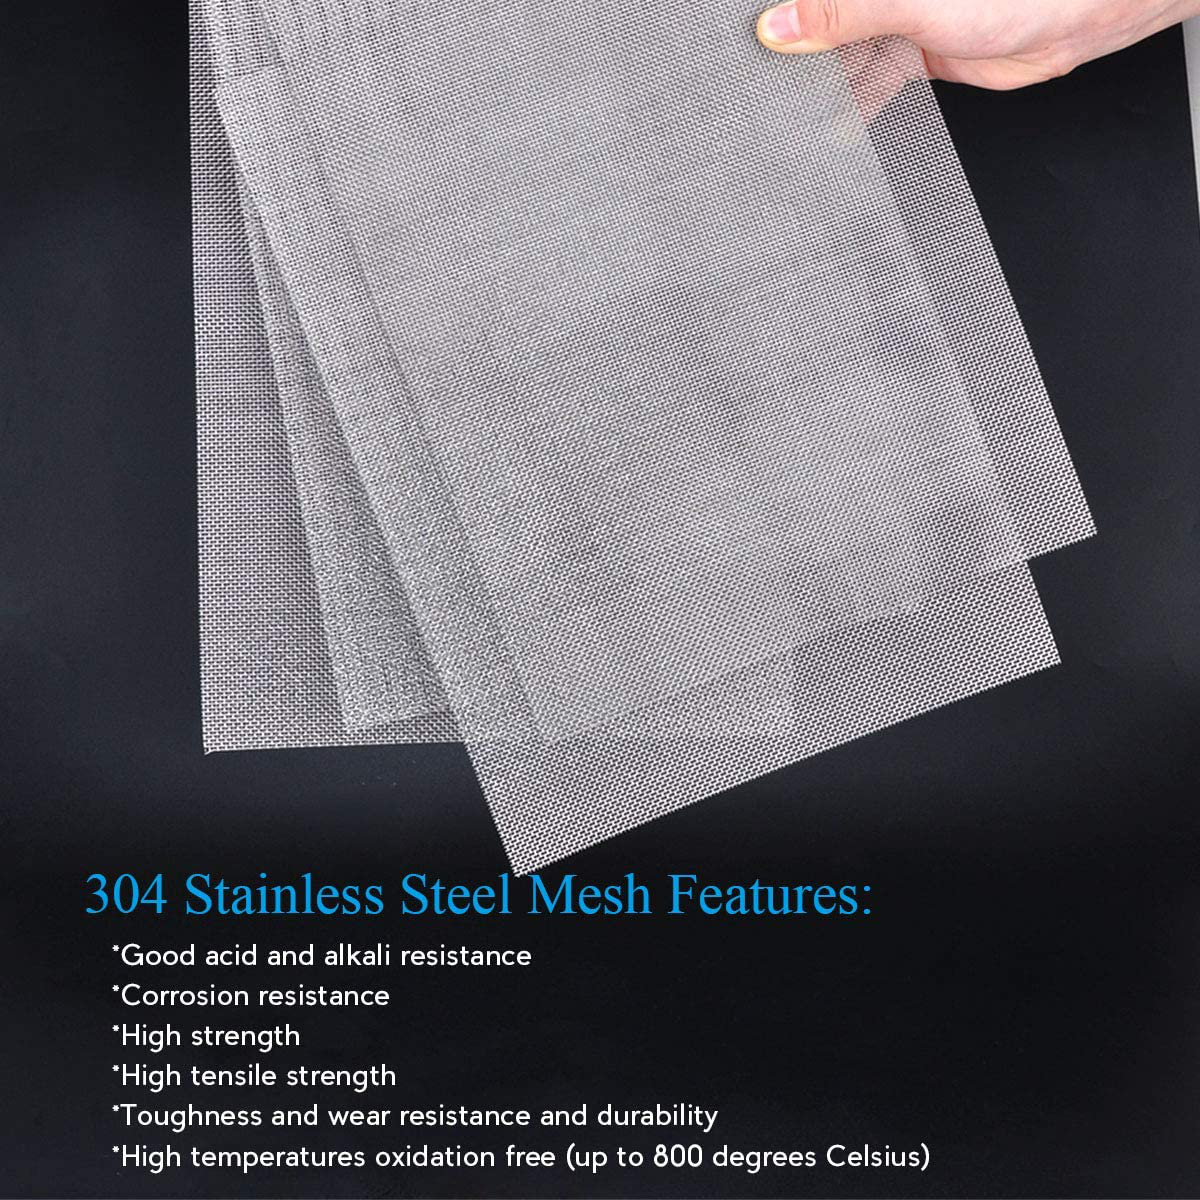 4PACK Stainless Steel Woven Wire Mesh Never Rust, Air Vent Mesh 11.8"X8.2"(300X 210mm), Hard and Heat Resisting Screen Mesh, 1mm Hole 20 Mesh Easy to Cut by Valchoose